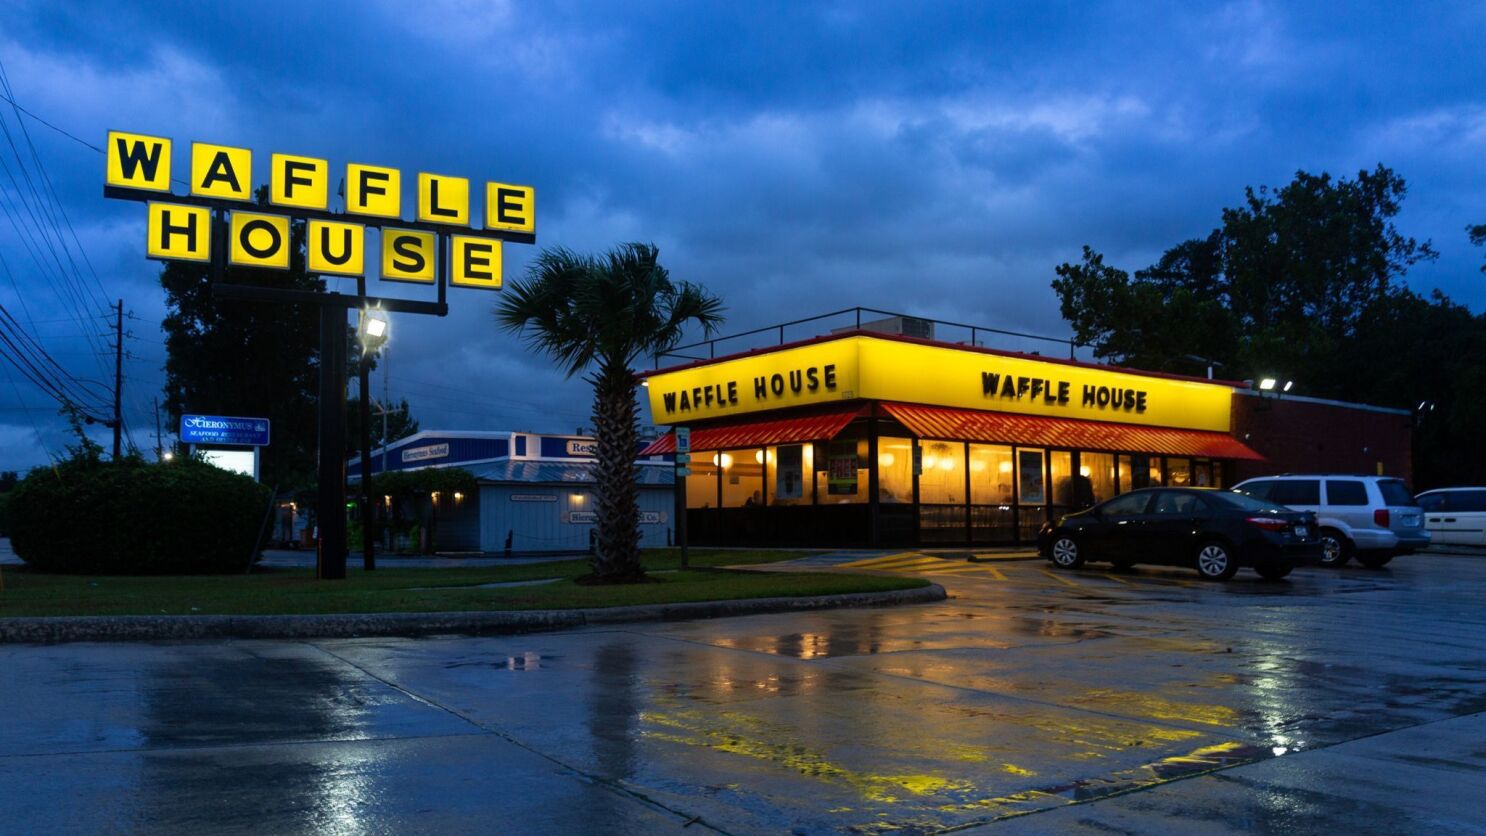 As Rain And Wind Empty Out A North Carolina Town There S Always One Place To Ride Out A Hurricane Waffle House Los Angeles Times